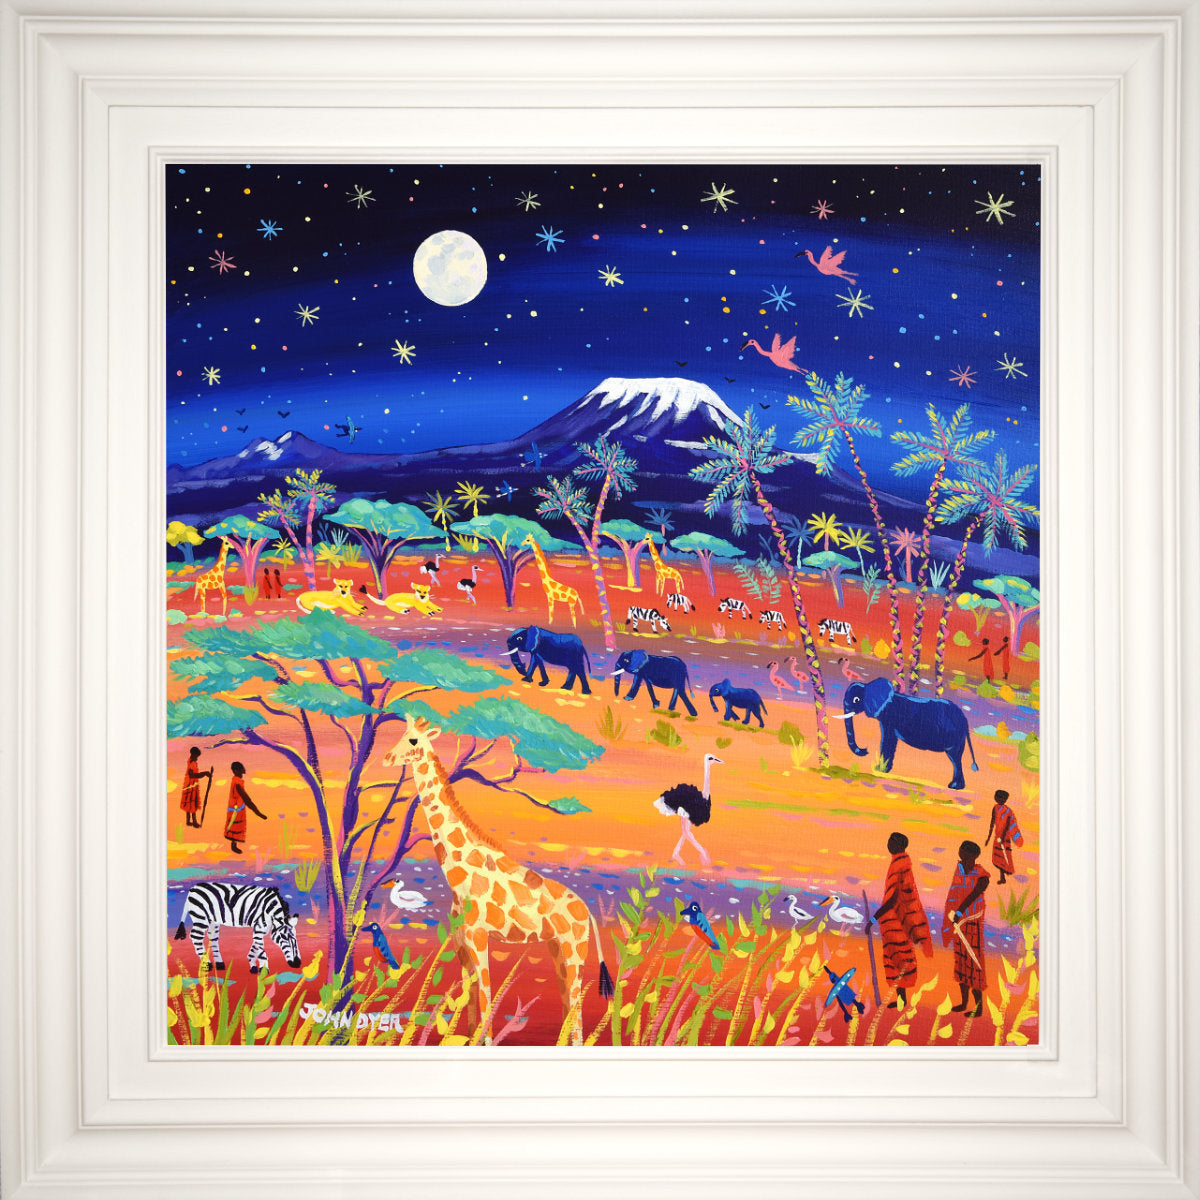 'African Nights, Amboseli, Kenya', 24x24 inches acrylic on canvas. African Painting by British Artist John Dyer.